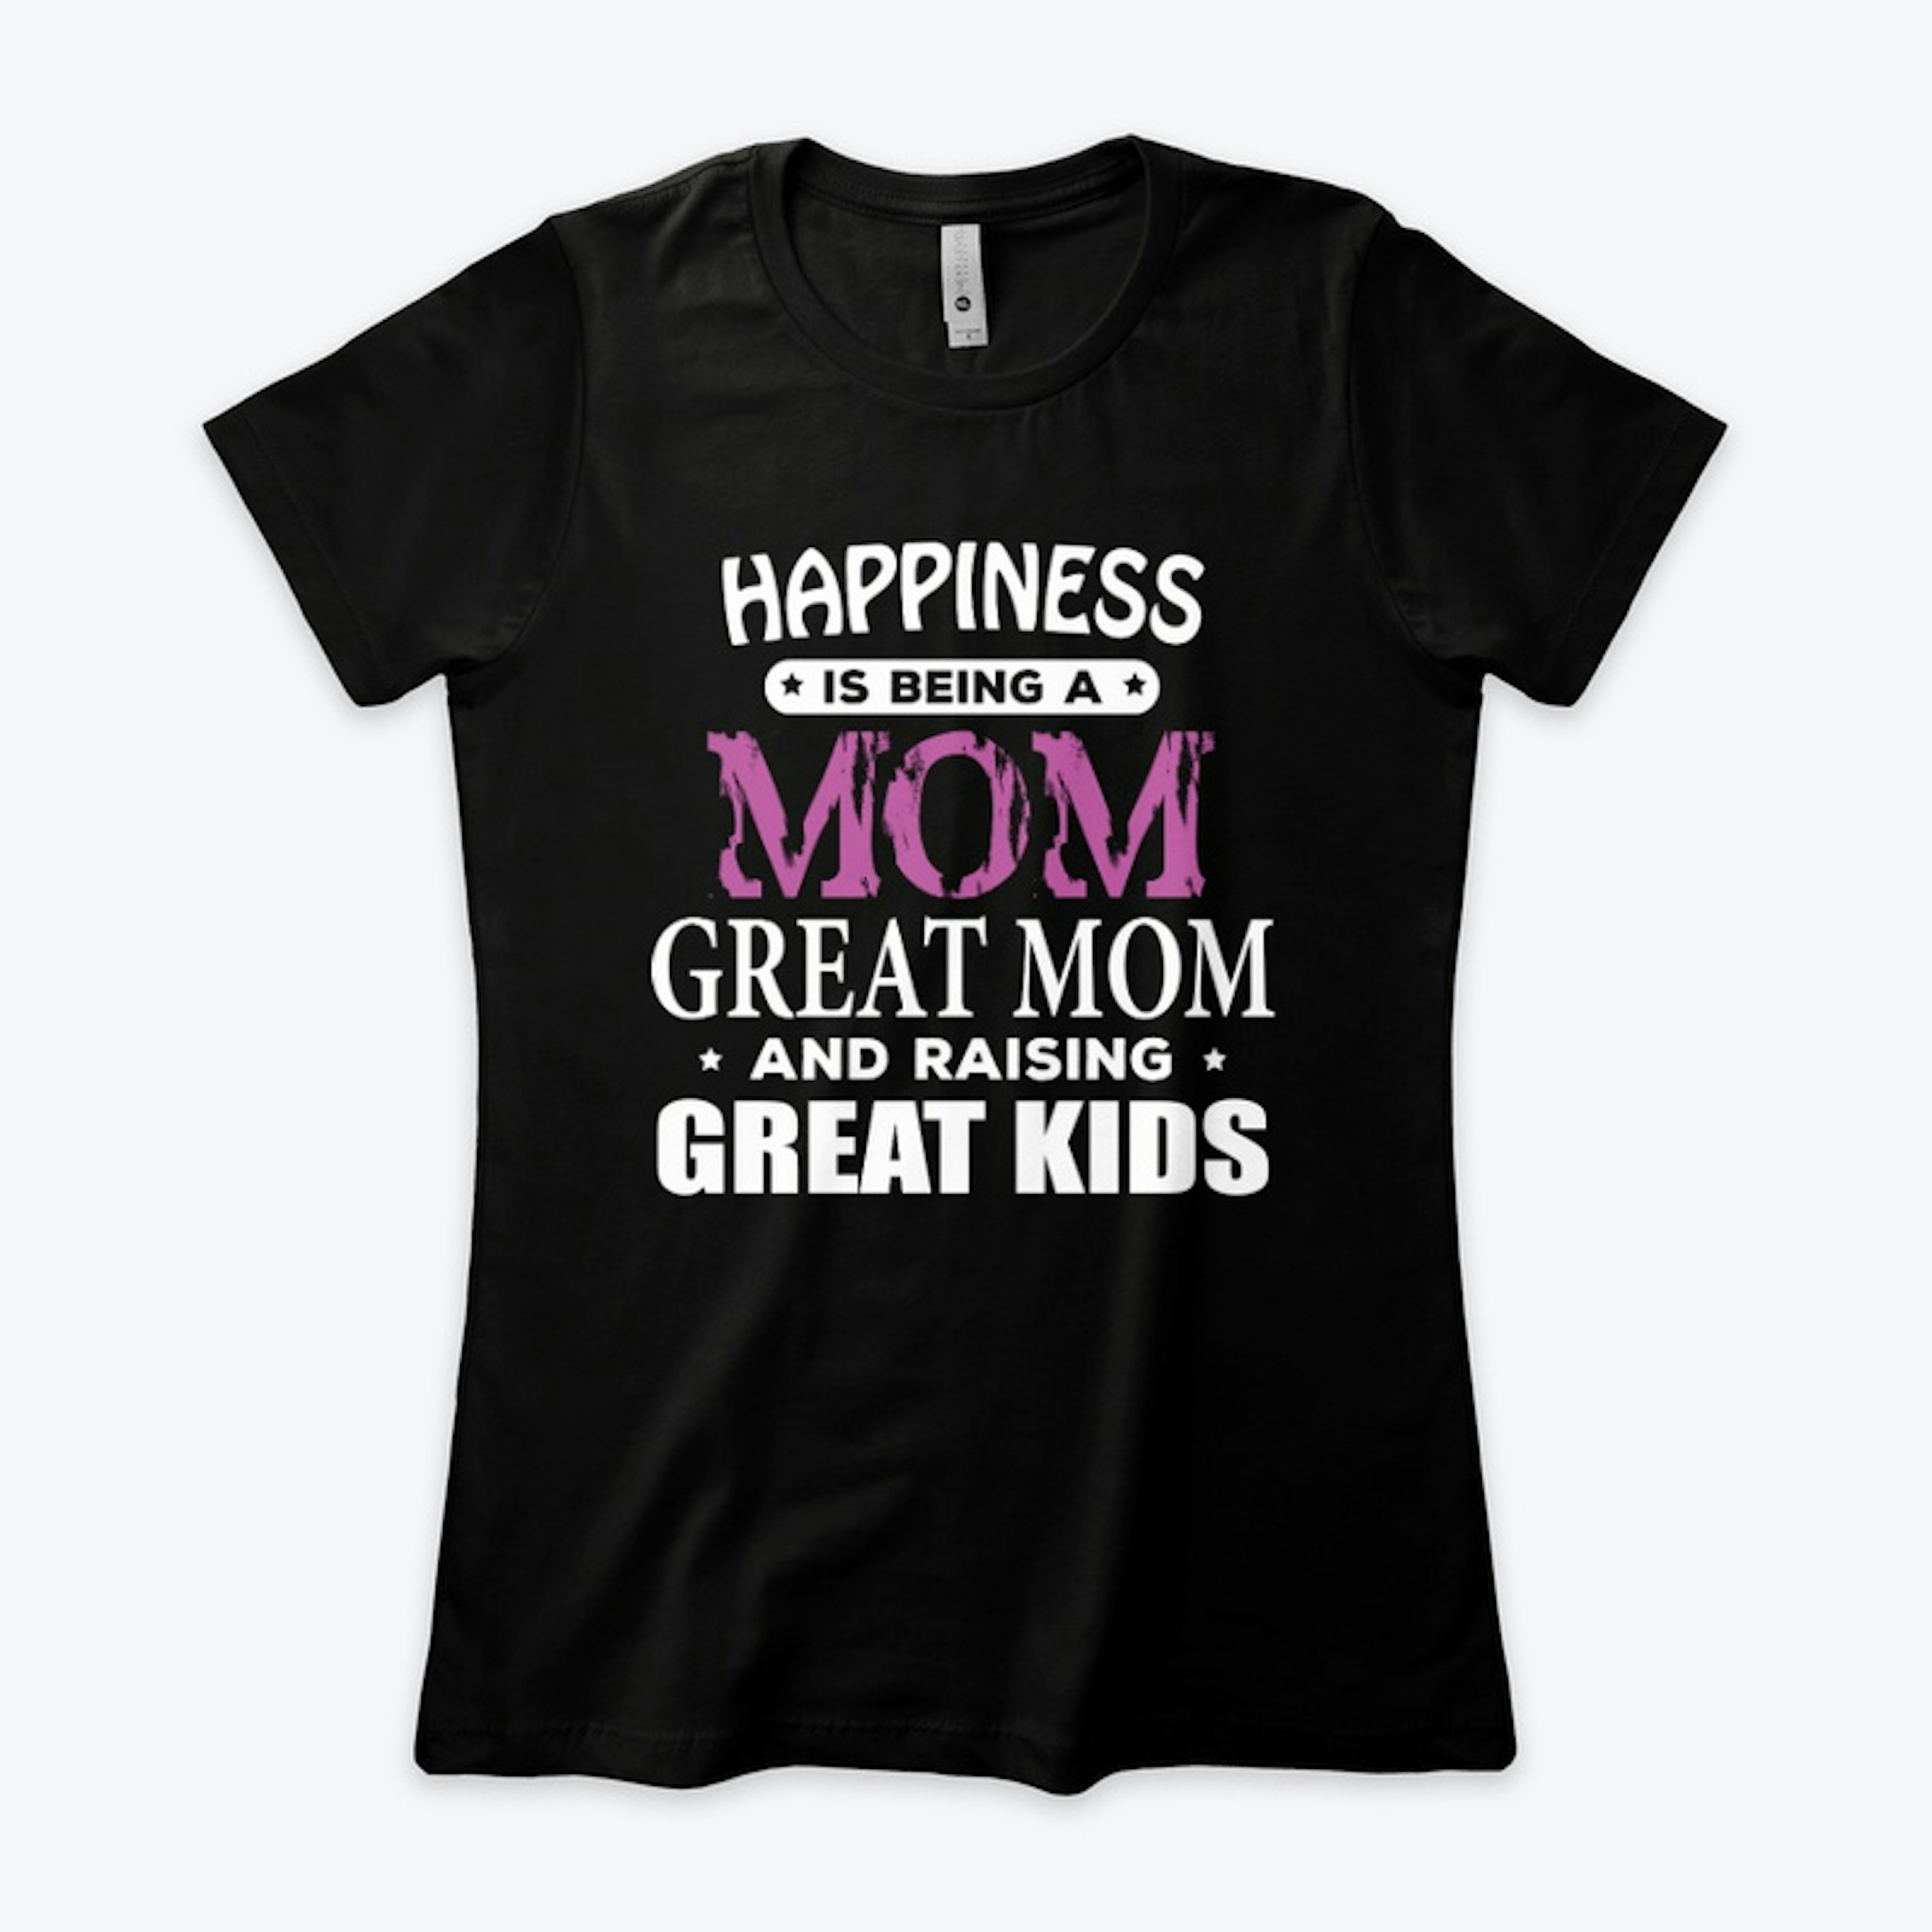 Great MOM and Kids Tshirt gift